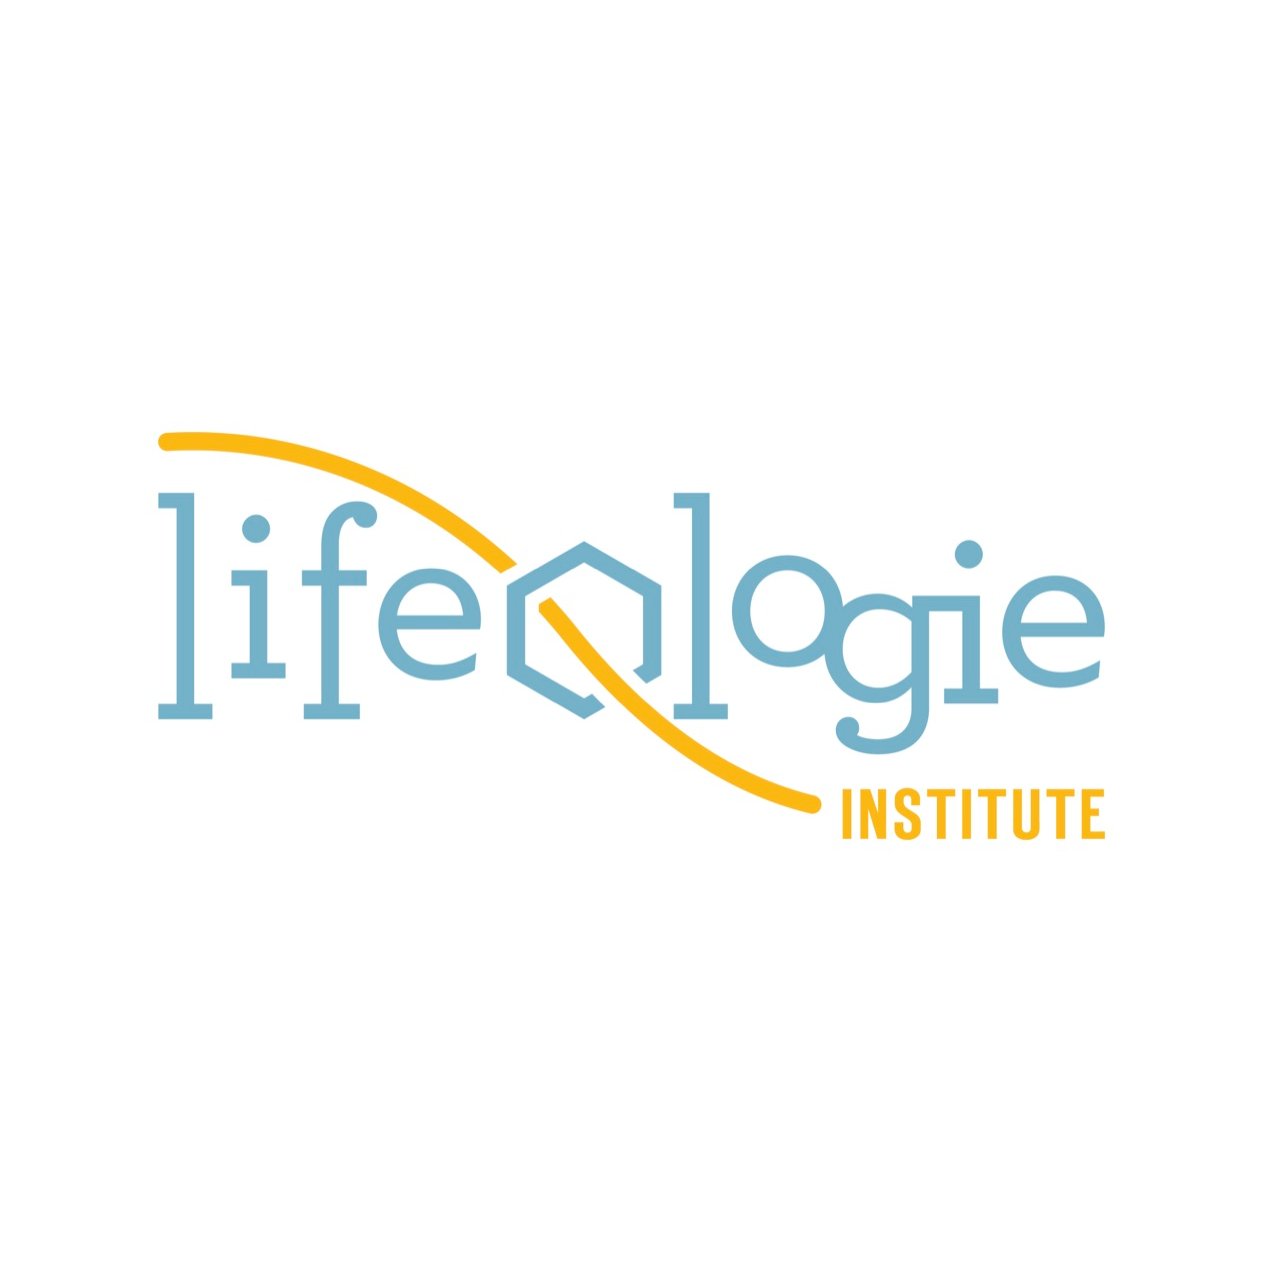 Lifeologie Institute: a collaborative group of creative therapists providing couples/ marriage counseling, grief and trauma support, teen & child therapy.